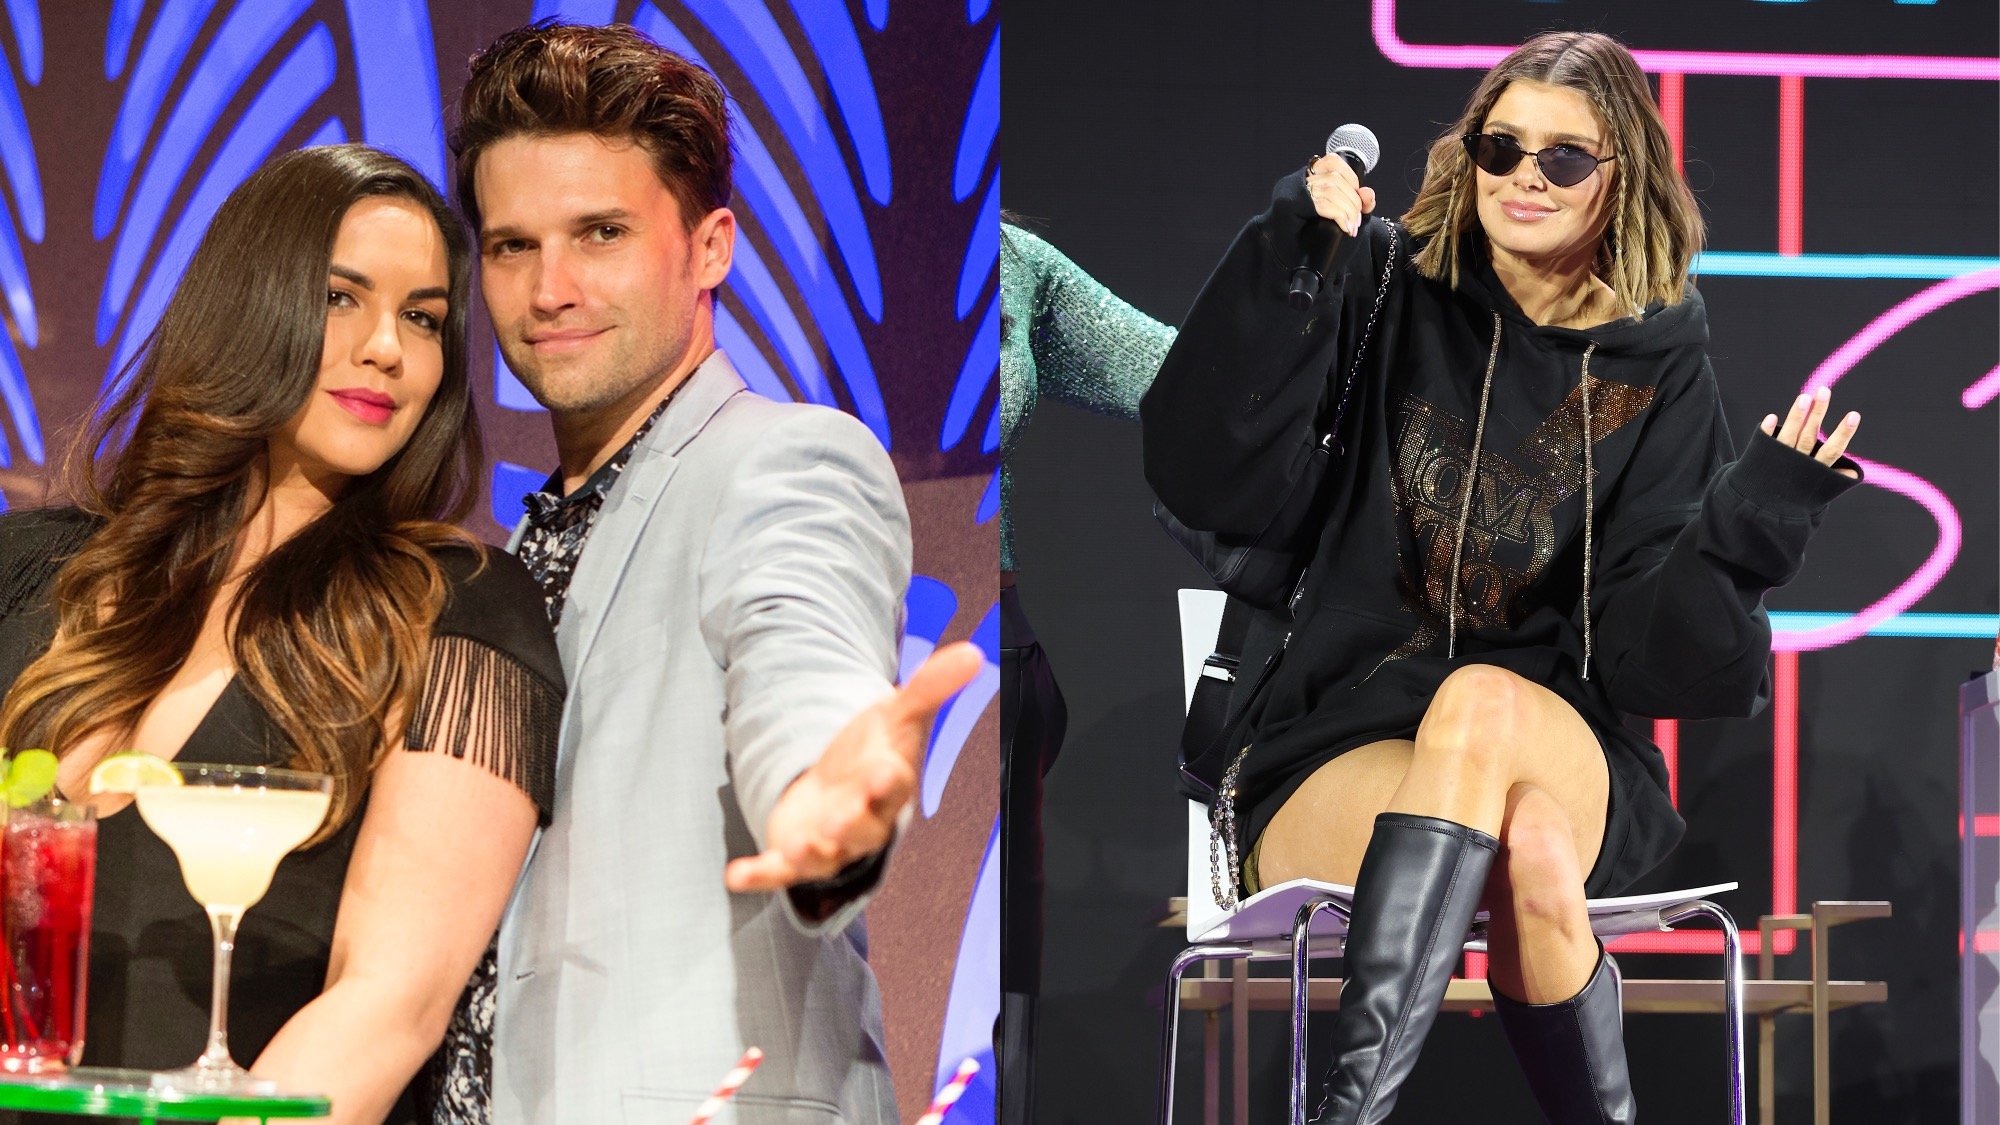 Katie Maloney, pictured with ex-husband Tom Schwartz on left, called Raquel Leviss (on right) a "fan girl" for wearing a TomTom hoodie.